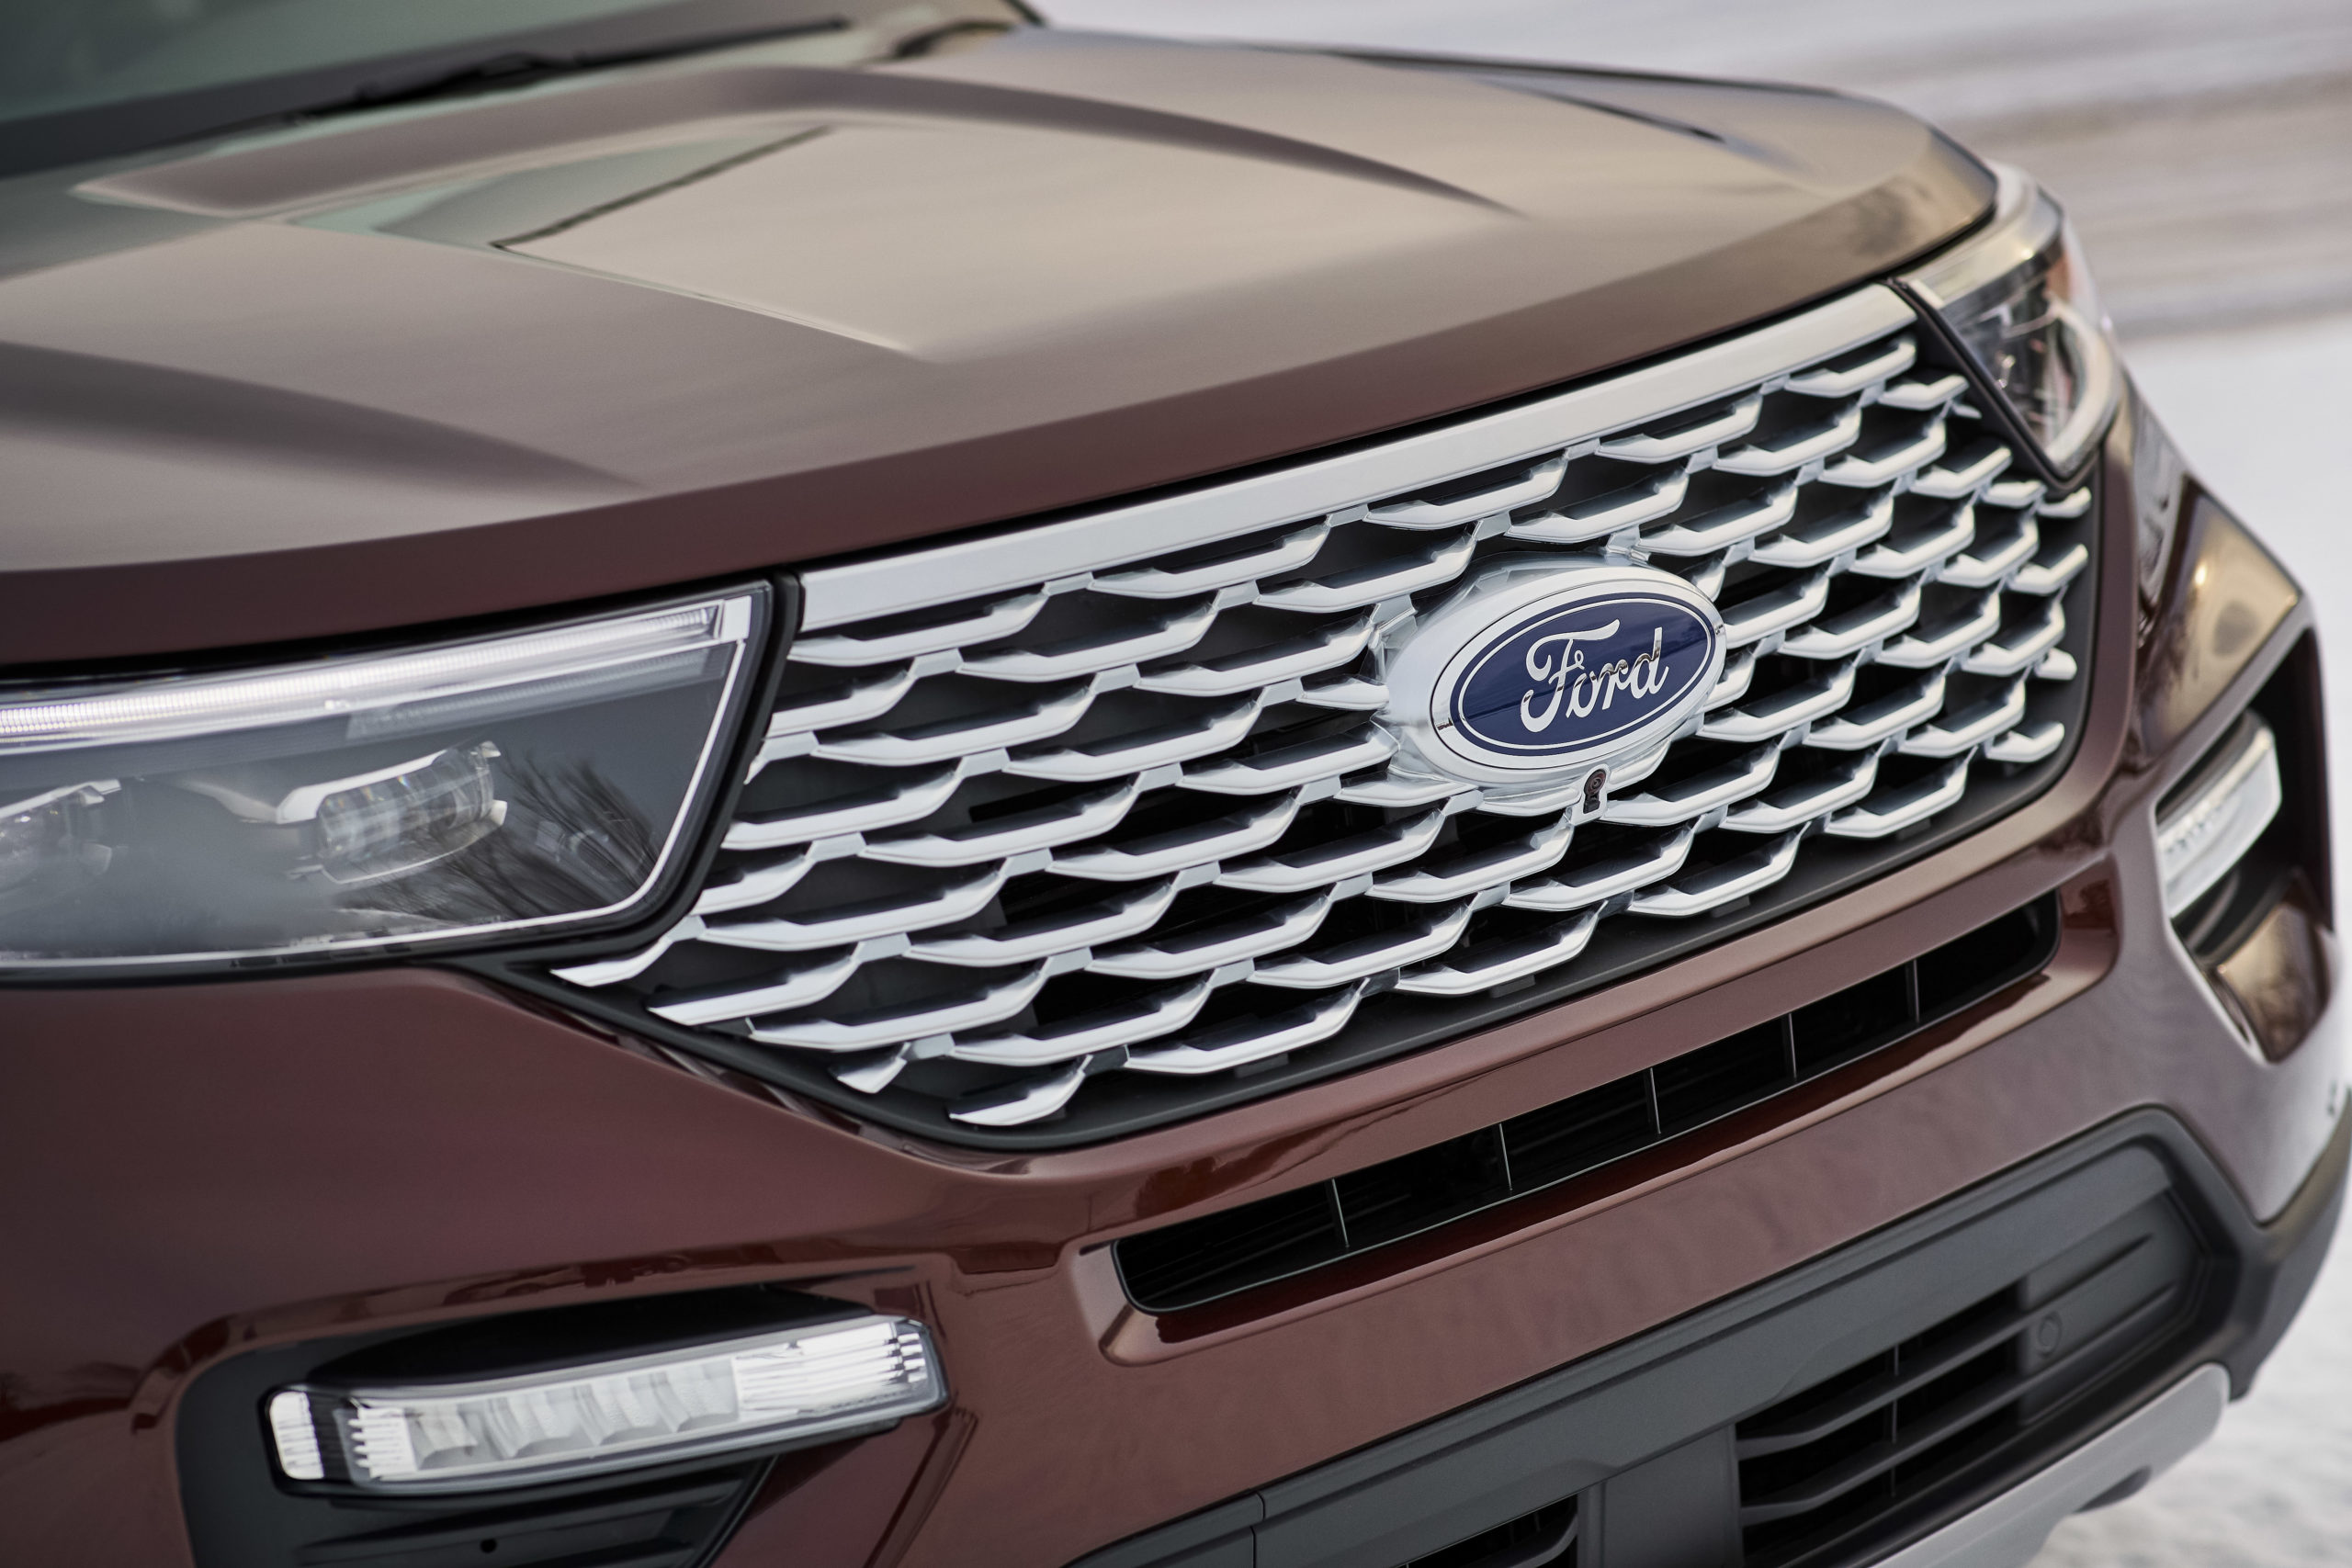 The grille of the 2020 Ford Explorer